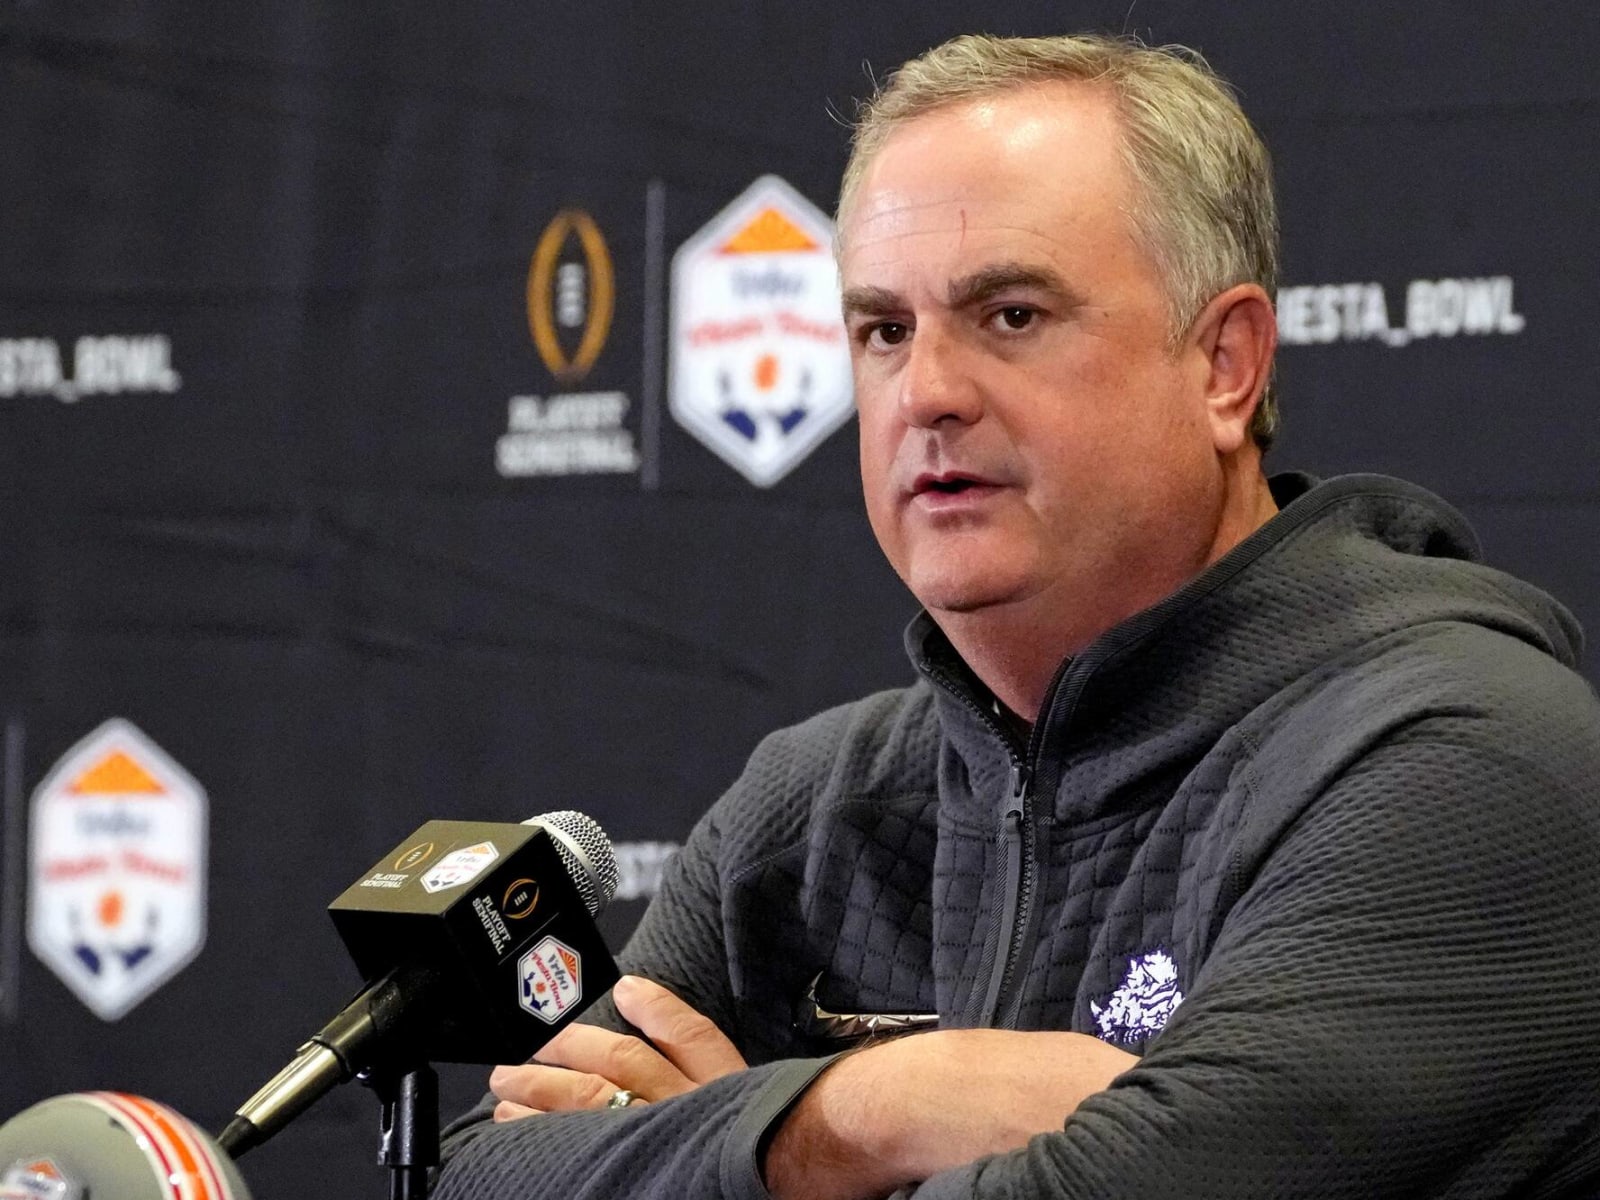 Sonny Dykes misses mark with recent comments on SEC | Yardbarker